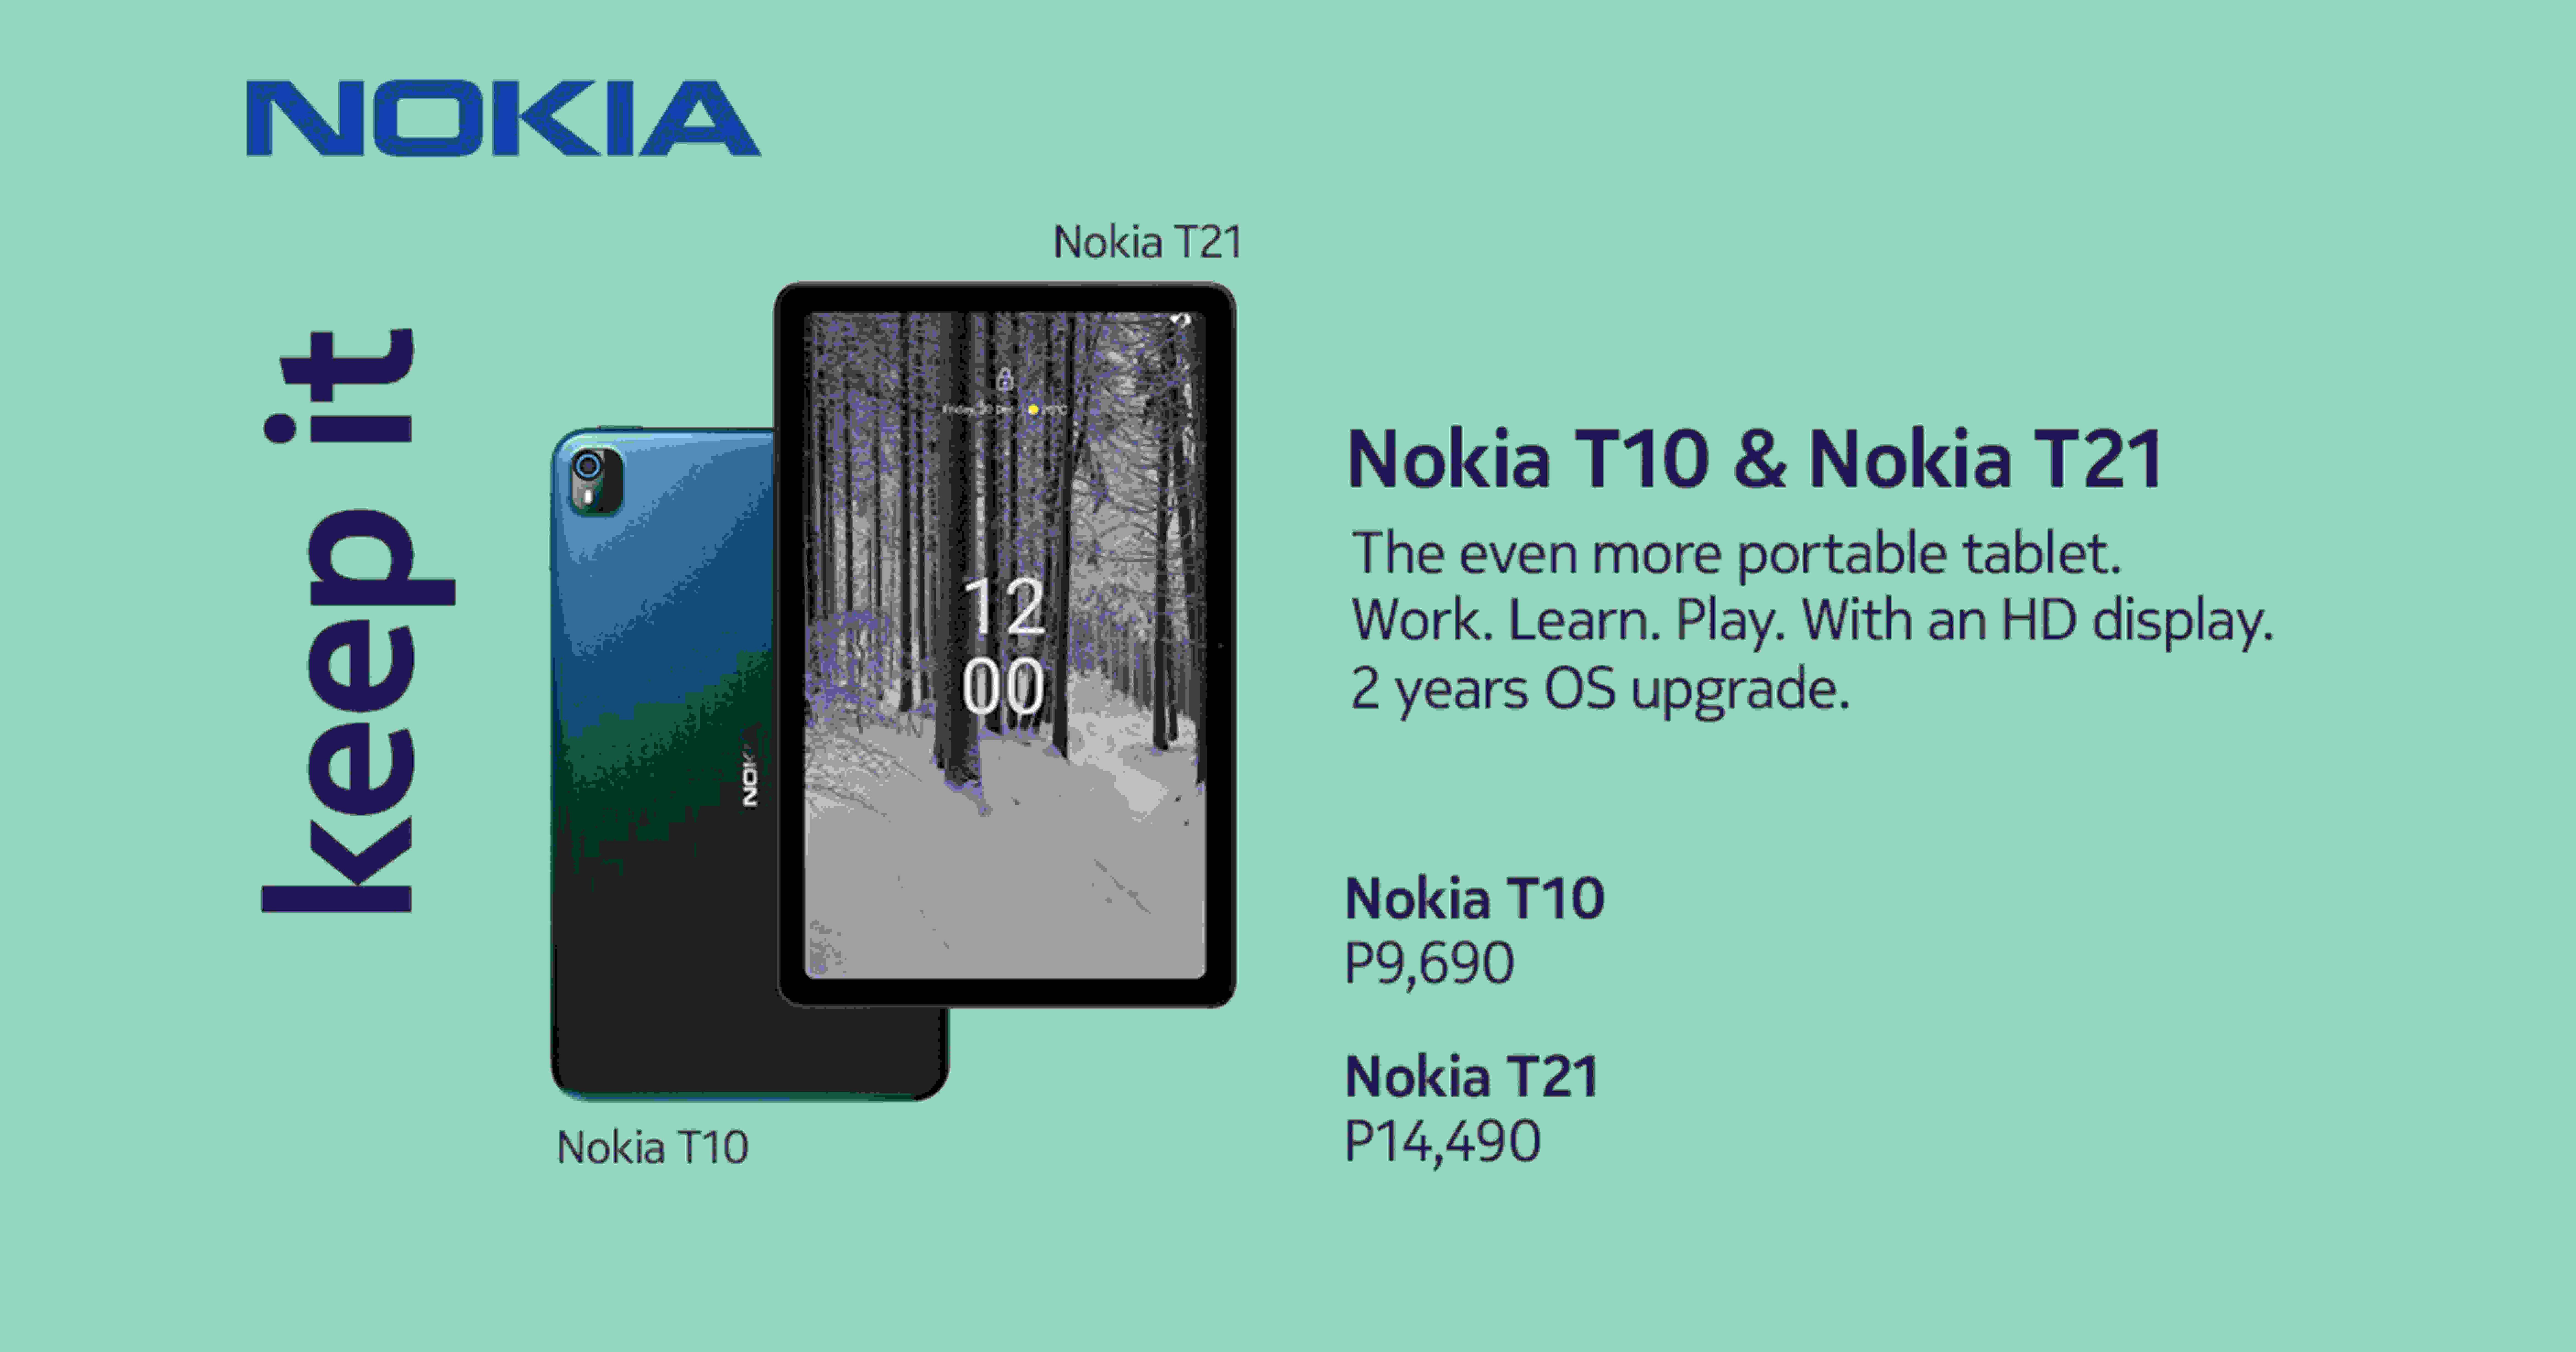 HMD Global expands its tablet portfolio in the Philippines with new Nokia T10 and T21